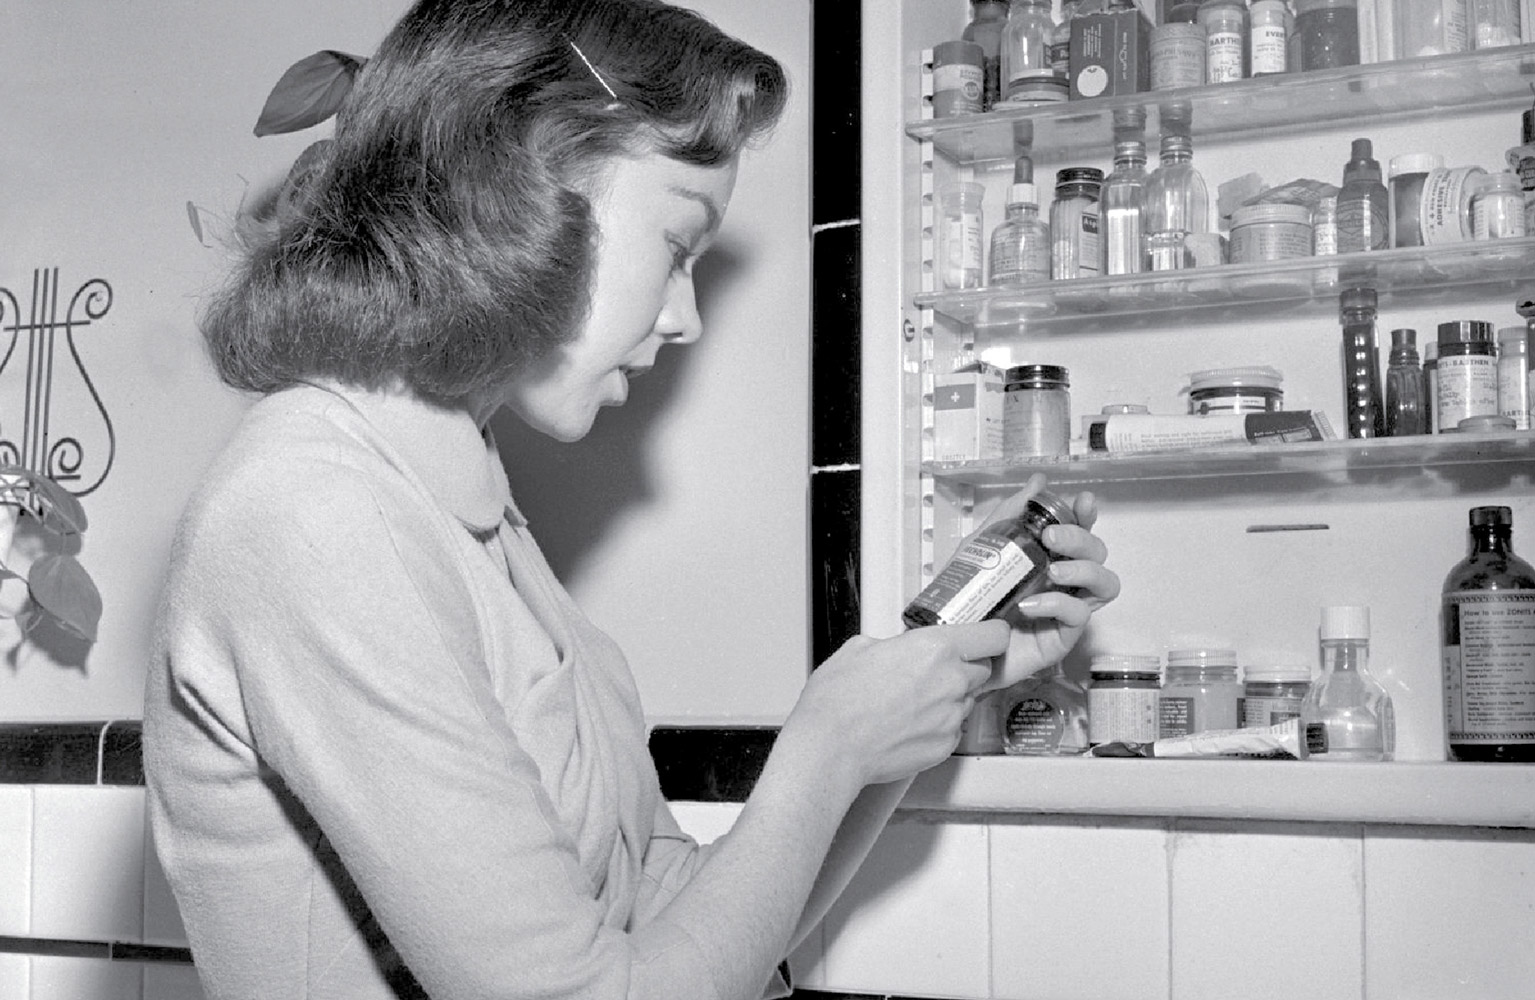 A photograph of a woman looking at a bottle from the medicine cabinet in a bathroom.